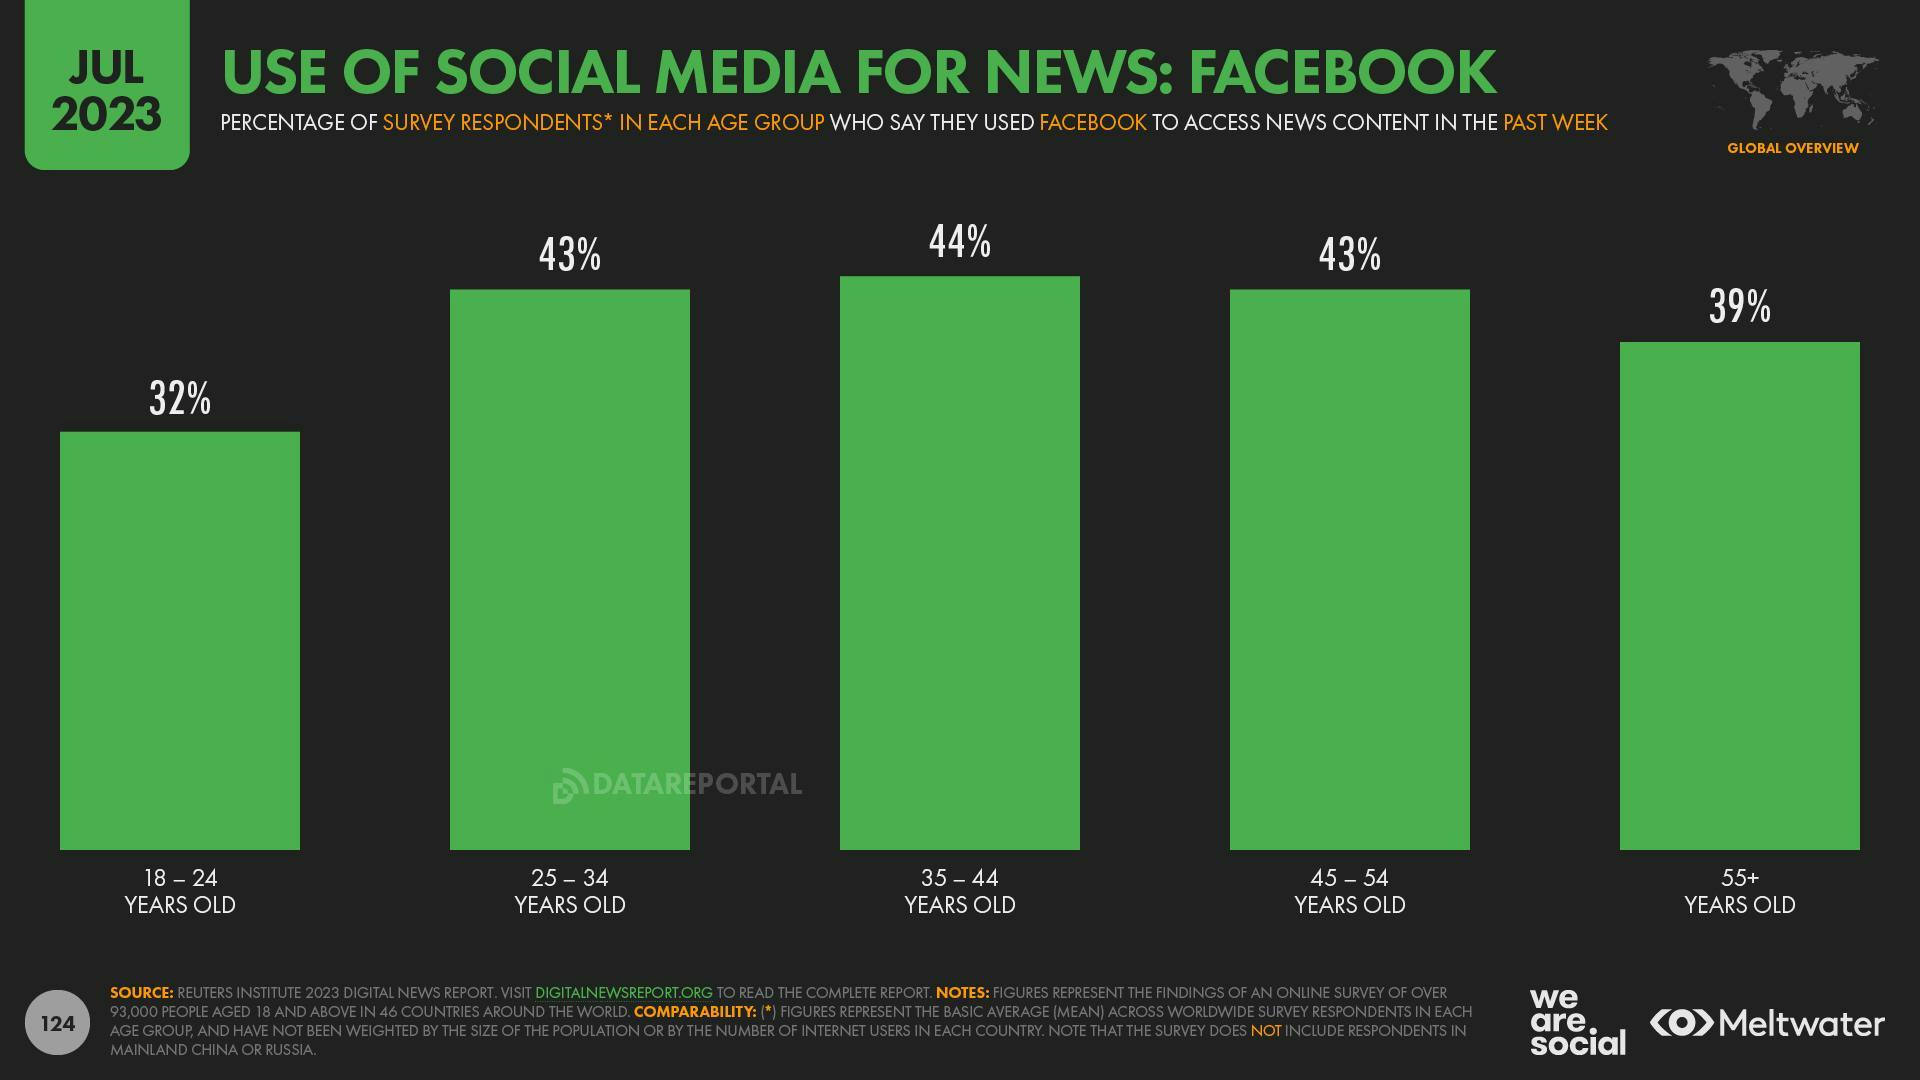 A bar chart showing the use of Facebook for news with the highest proportion at 44% of 35- to 44-year-olds, according to RISJ survey data.